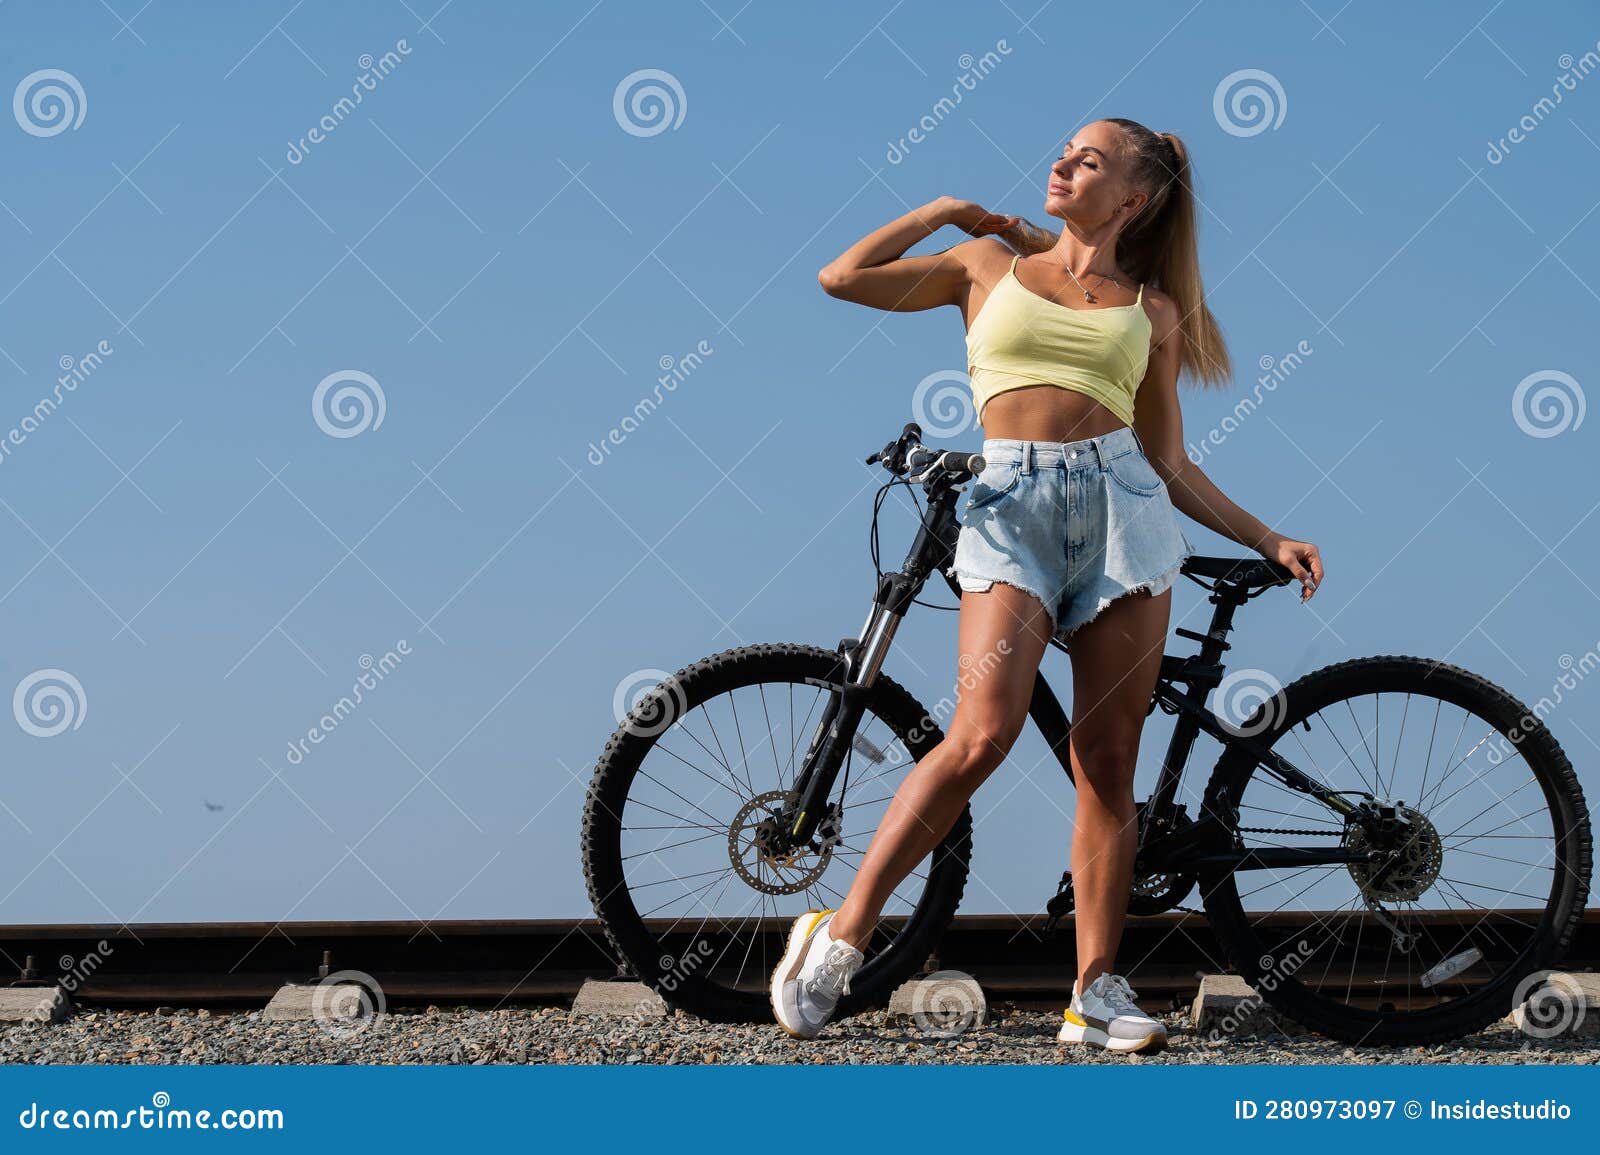 Caucasian Woman in Denim Shorts and Top Posing with a Bike on a Hot ...